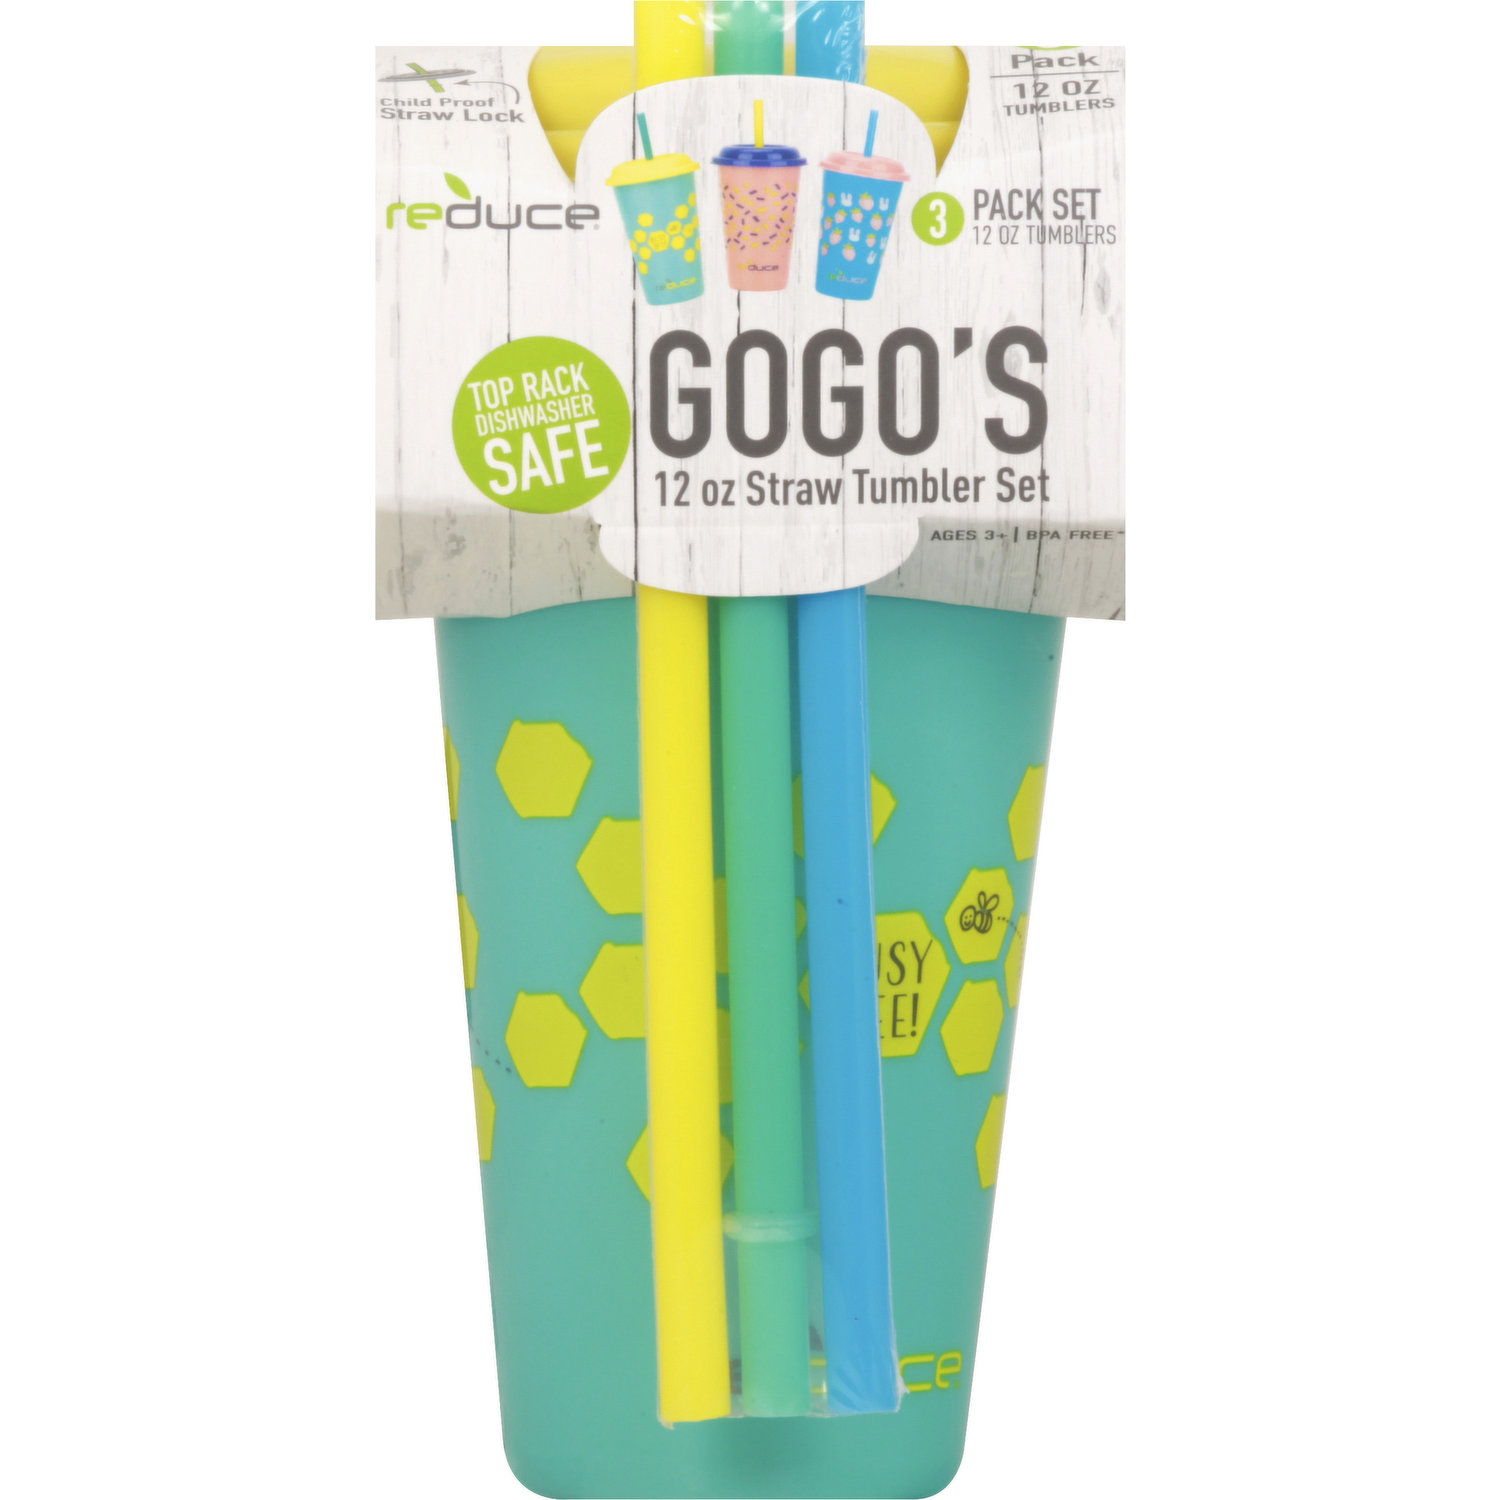 2X Reduce GoGo's Straw Tumblers 12 oz (3 Pack Sets) Lot of 2